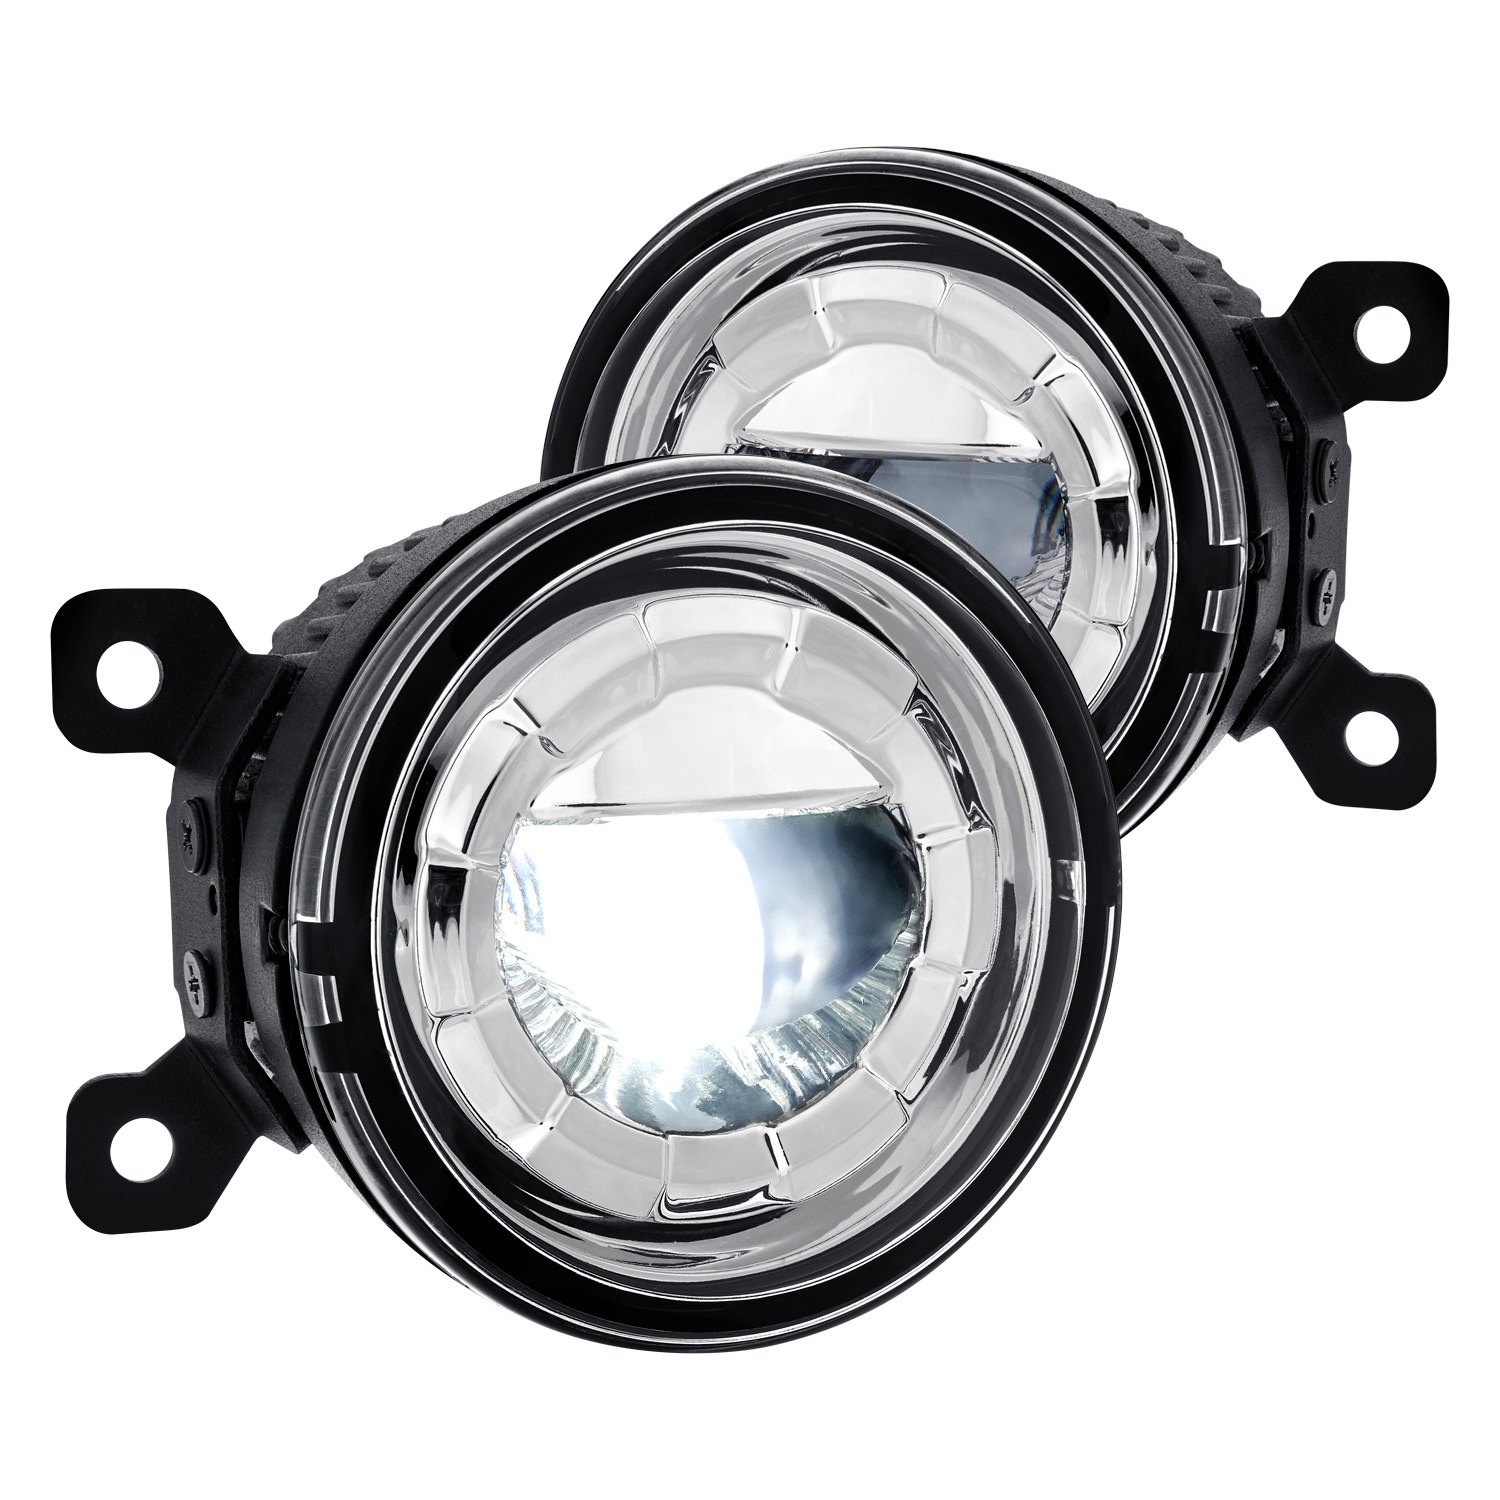 3.5"ROUND ALUMINUM HOUSING SMOKED 5W PROJECTOR LED DRIVING FOG LIGHT LAMP+MOUNT 